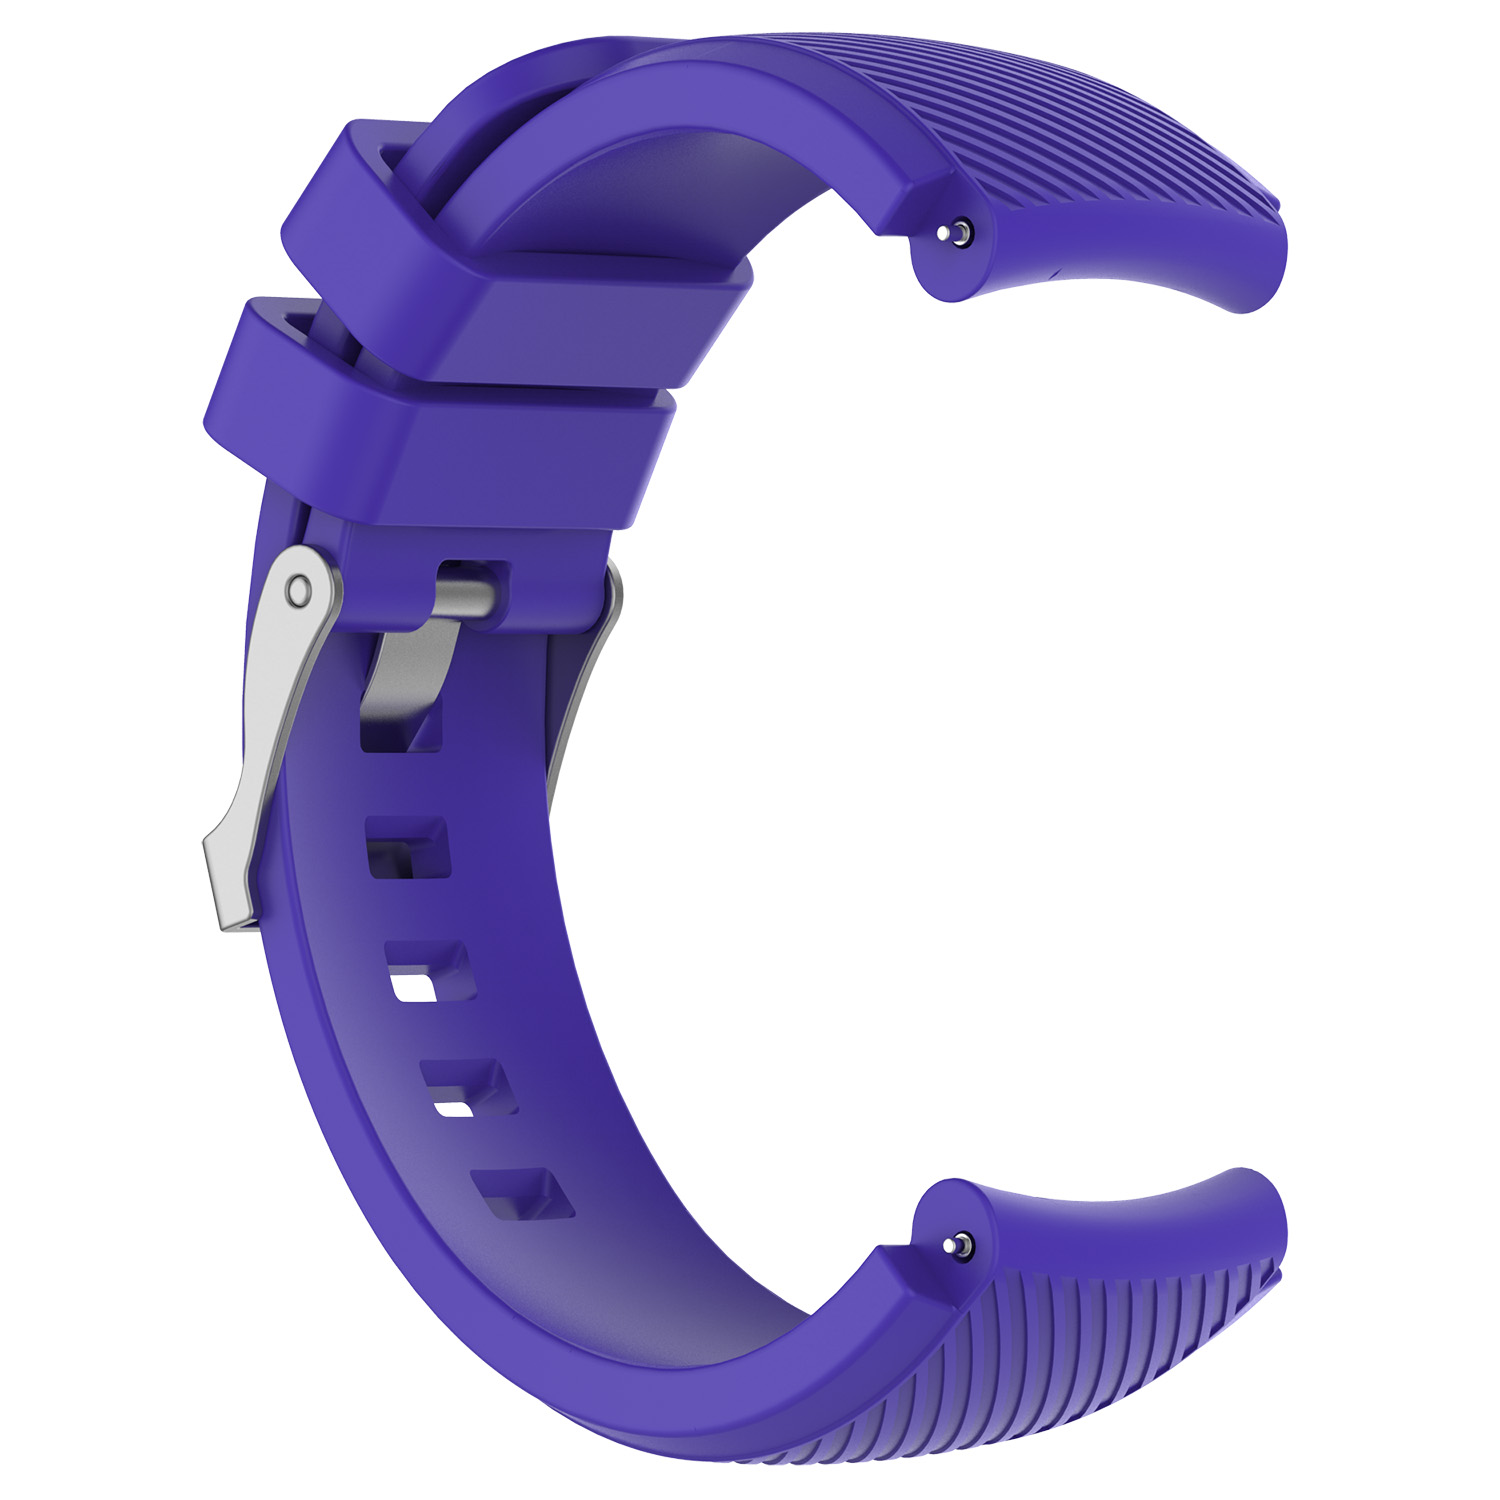 Bakeey-22mm-Universal-Watch-Band-Silicone-Watch-Strap-Replacement-for-HUAWEI-Watch-GT-1730954-7